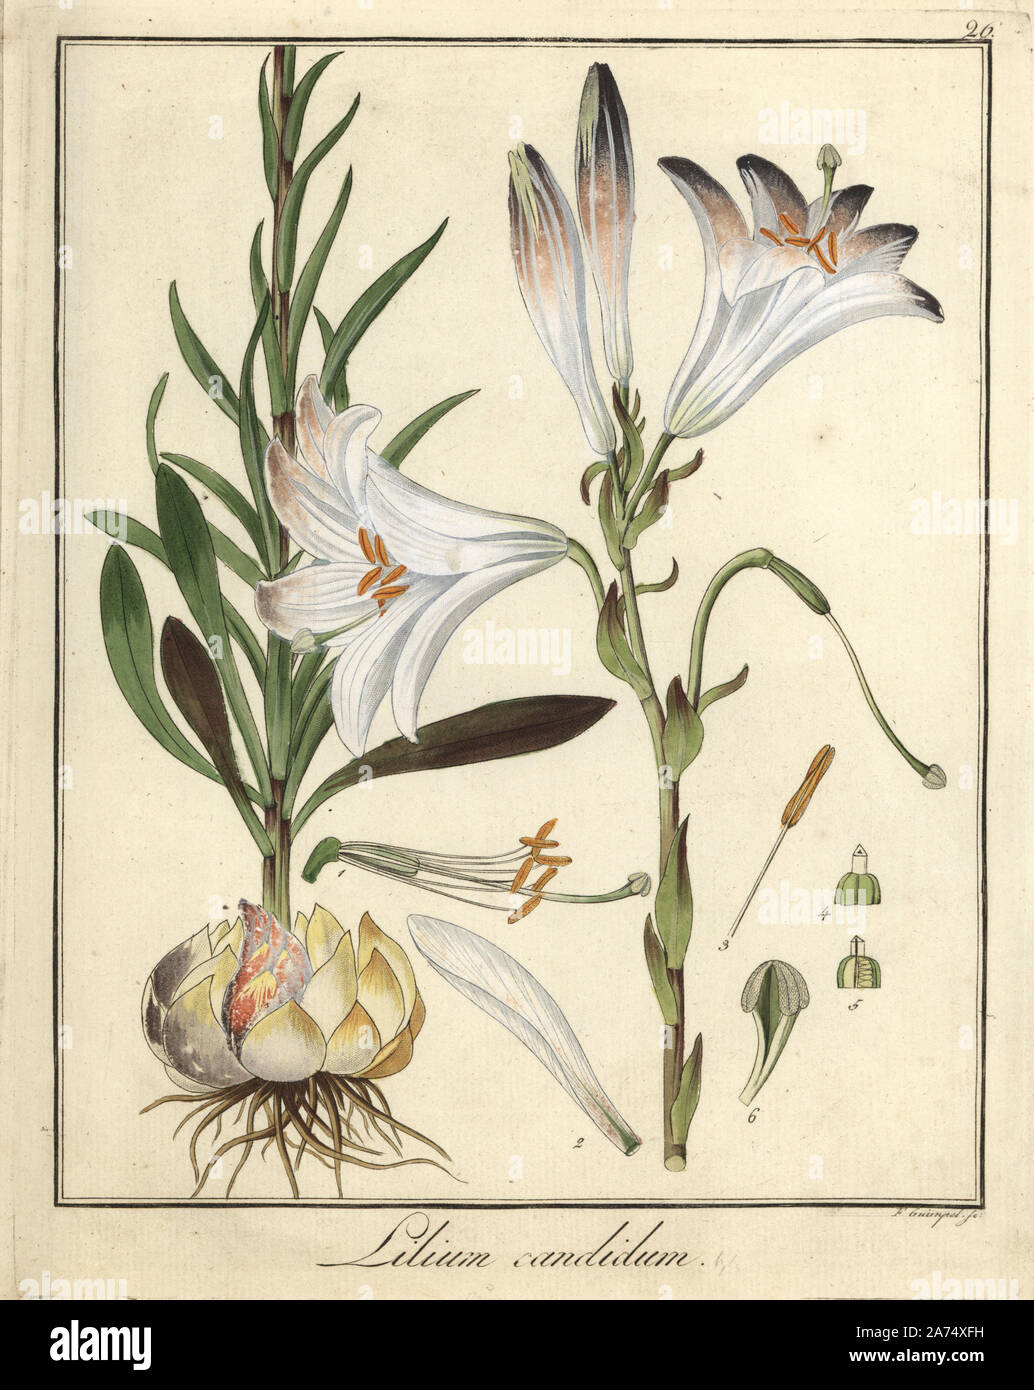 Madonna lily, Lilium candidum. Handcoloured copperplate engraving by F. Guimpel from Dr. Friedrich Gottlob Hayne's Medical Botany, Berlin, 1822. Hayne (1763-1832) was a German botanist, apothecary and professor of pharmaceutical botany at Berlin University. Stock Photo